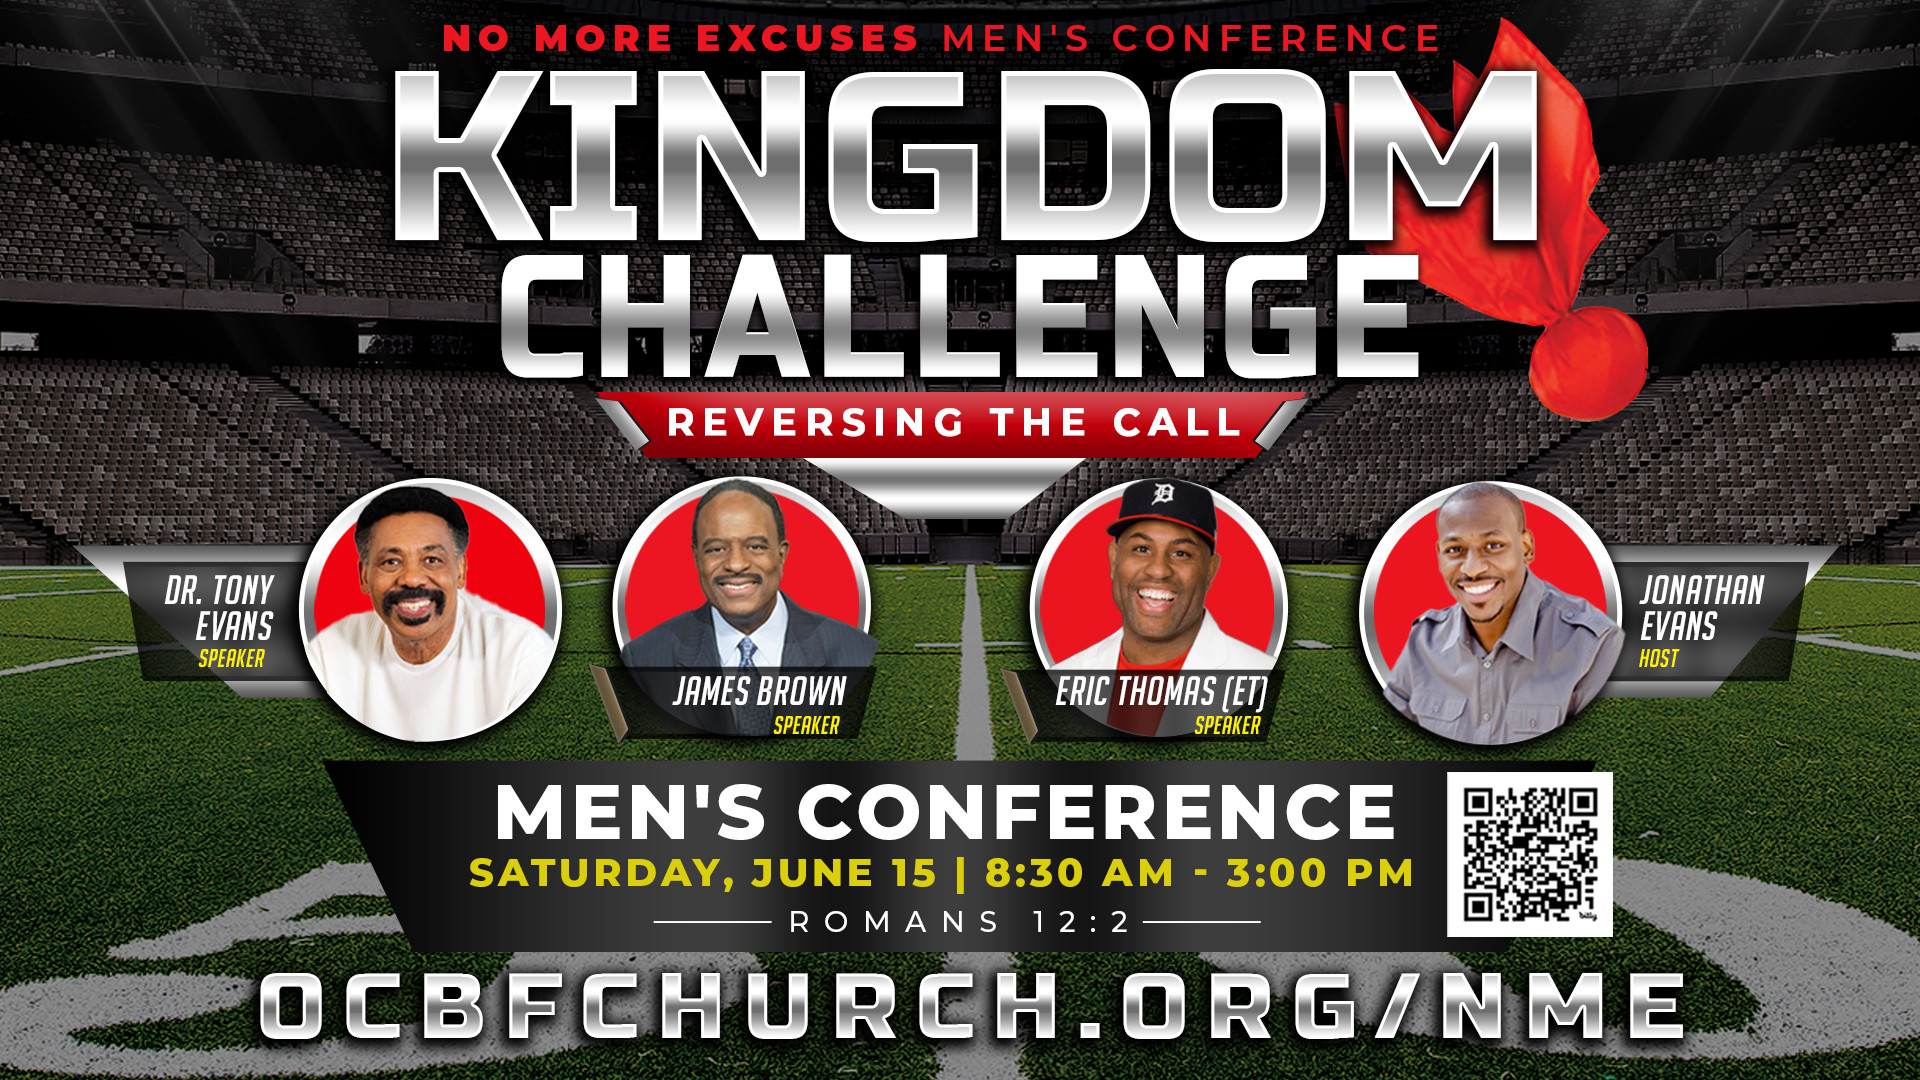 No More Excuses Men's Conference Kingdom Challenge Reversing the Call with Tony Evans, Jonathan Evans, James Brown, Eric Thomas